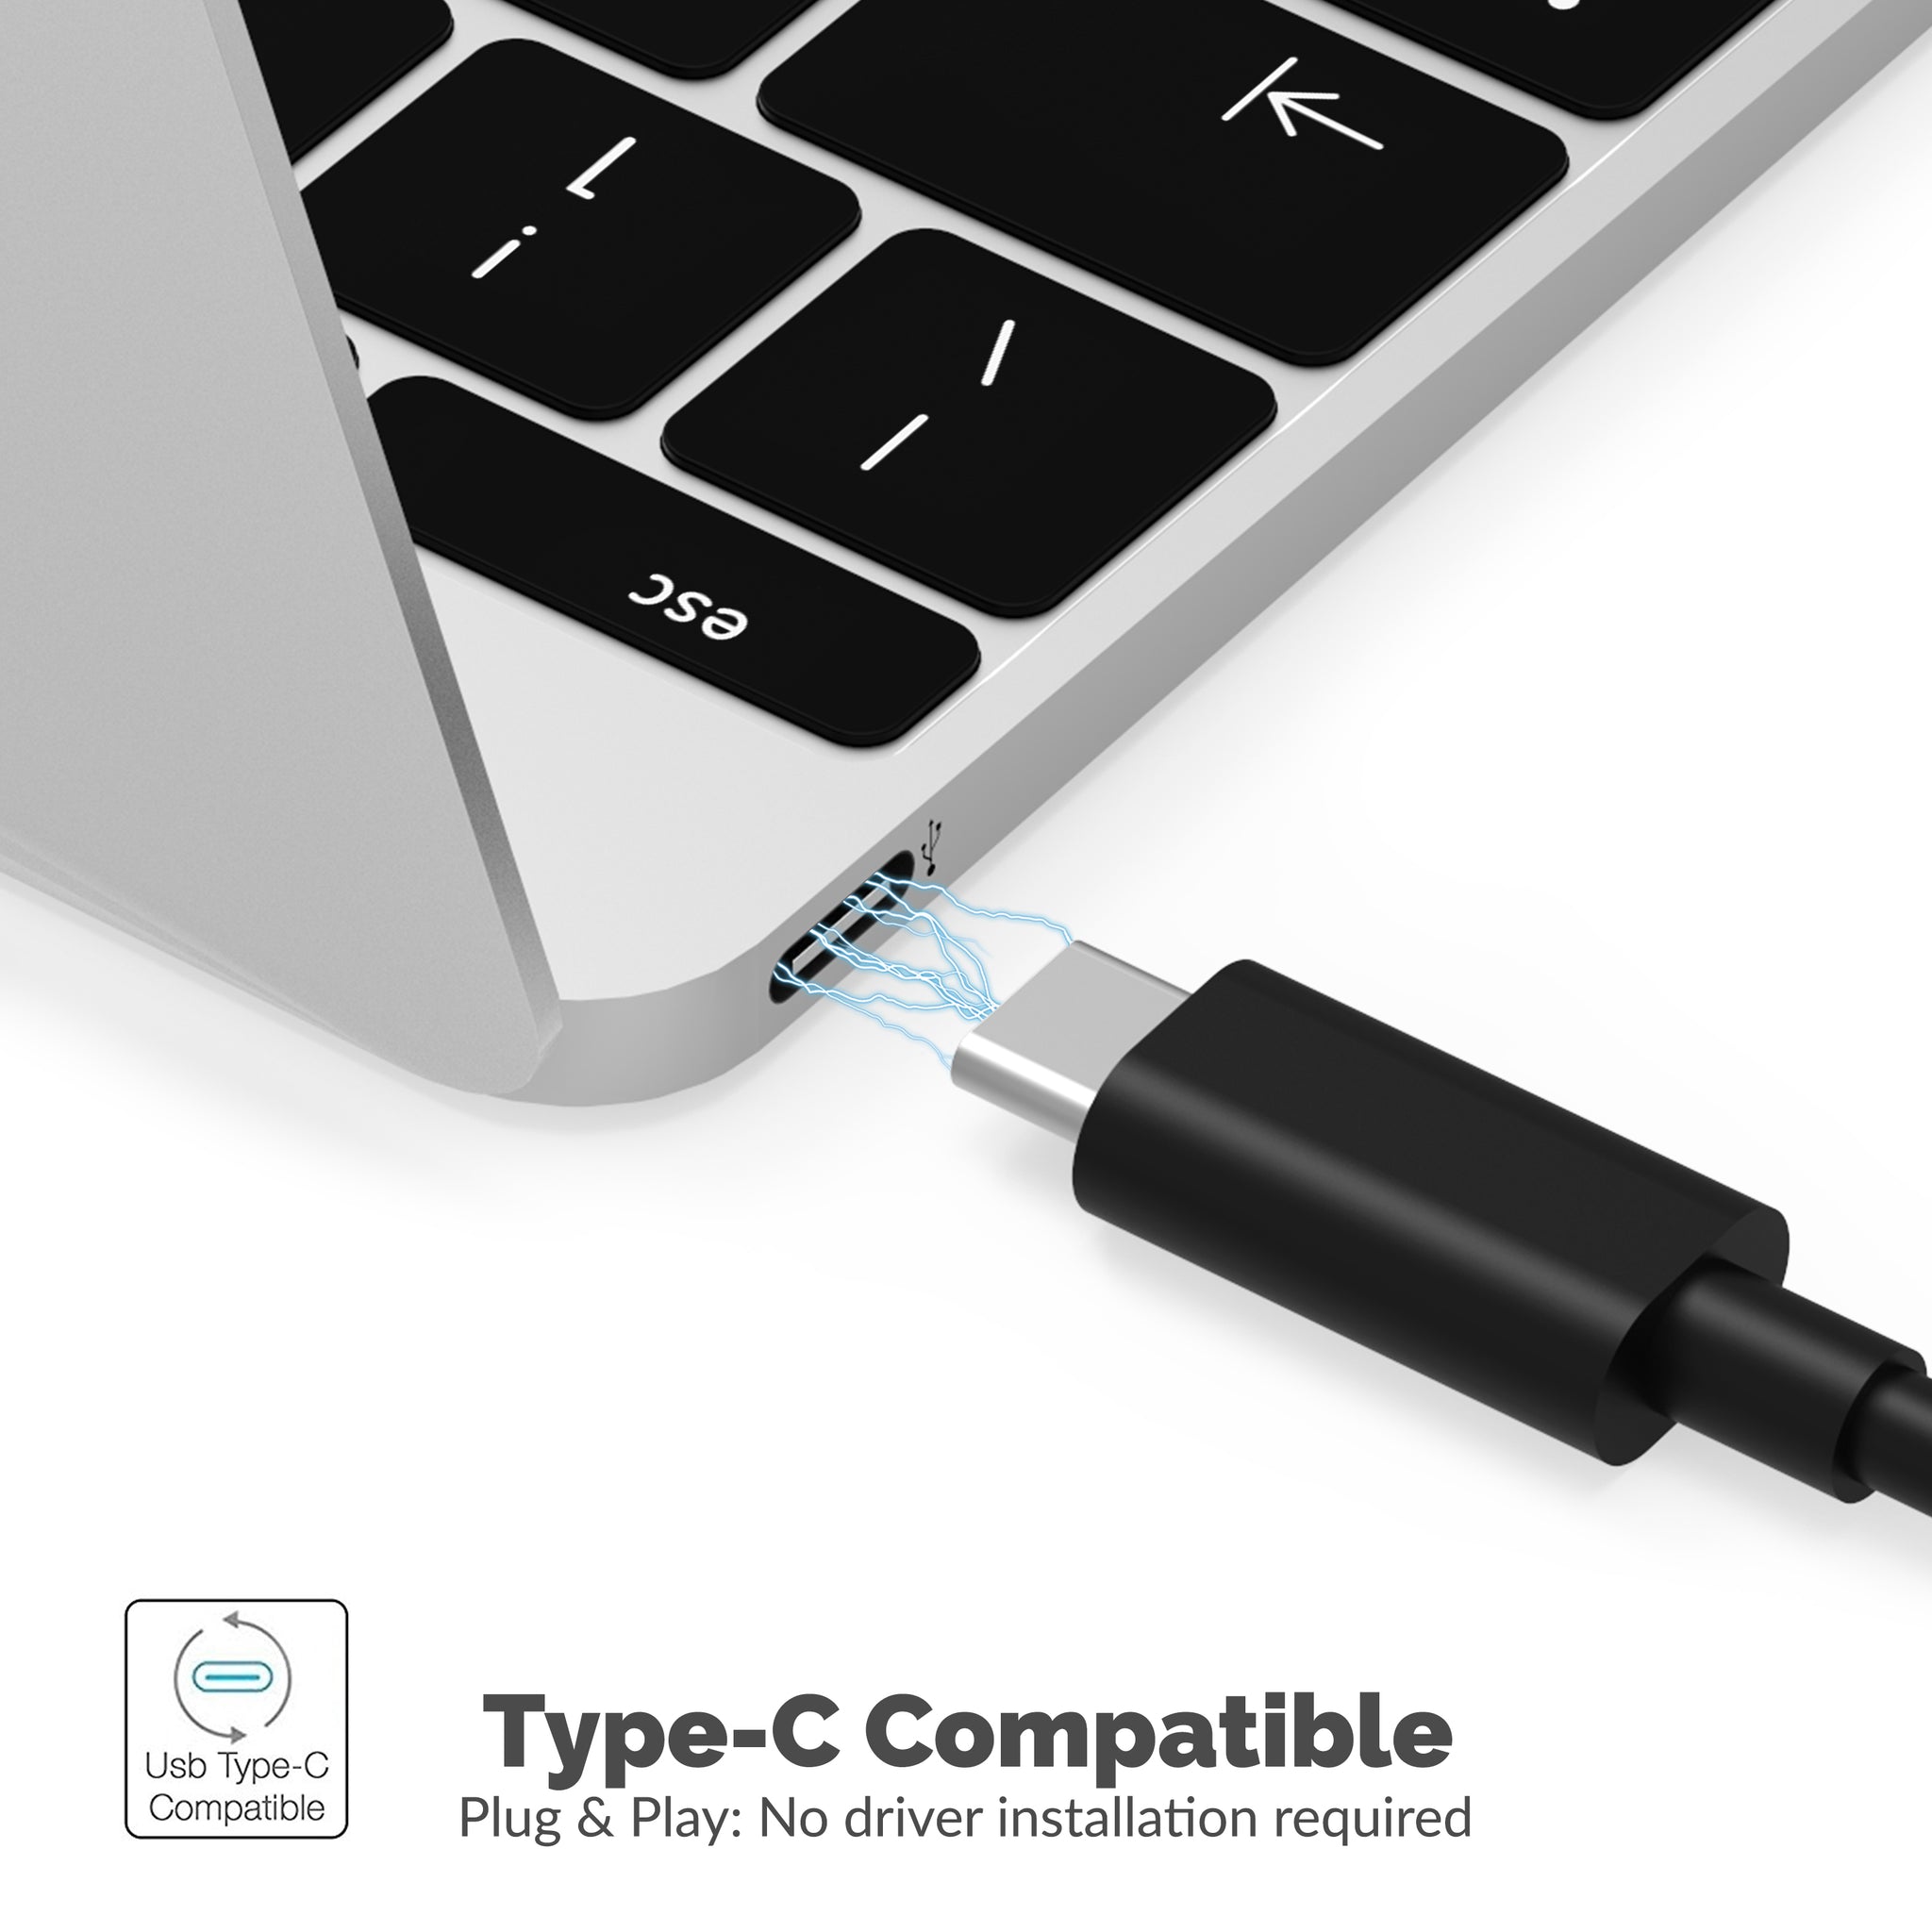 USB 3.1 (10Gbps) Adapter Cable for 2.5”/3.5” SATA Drives - USB-C